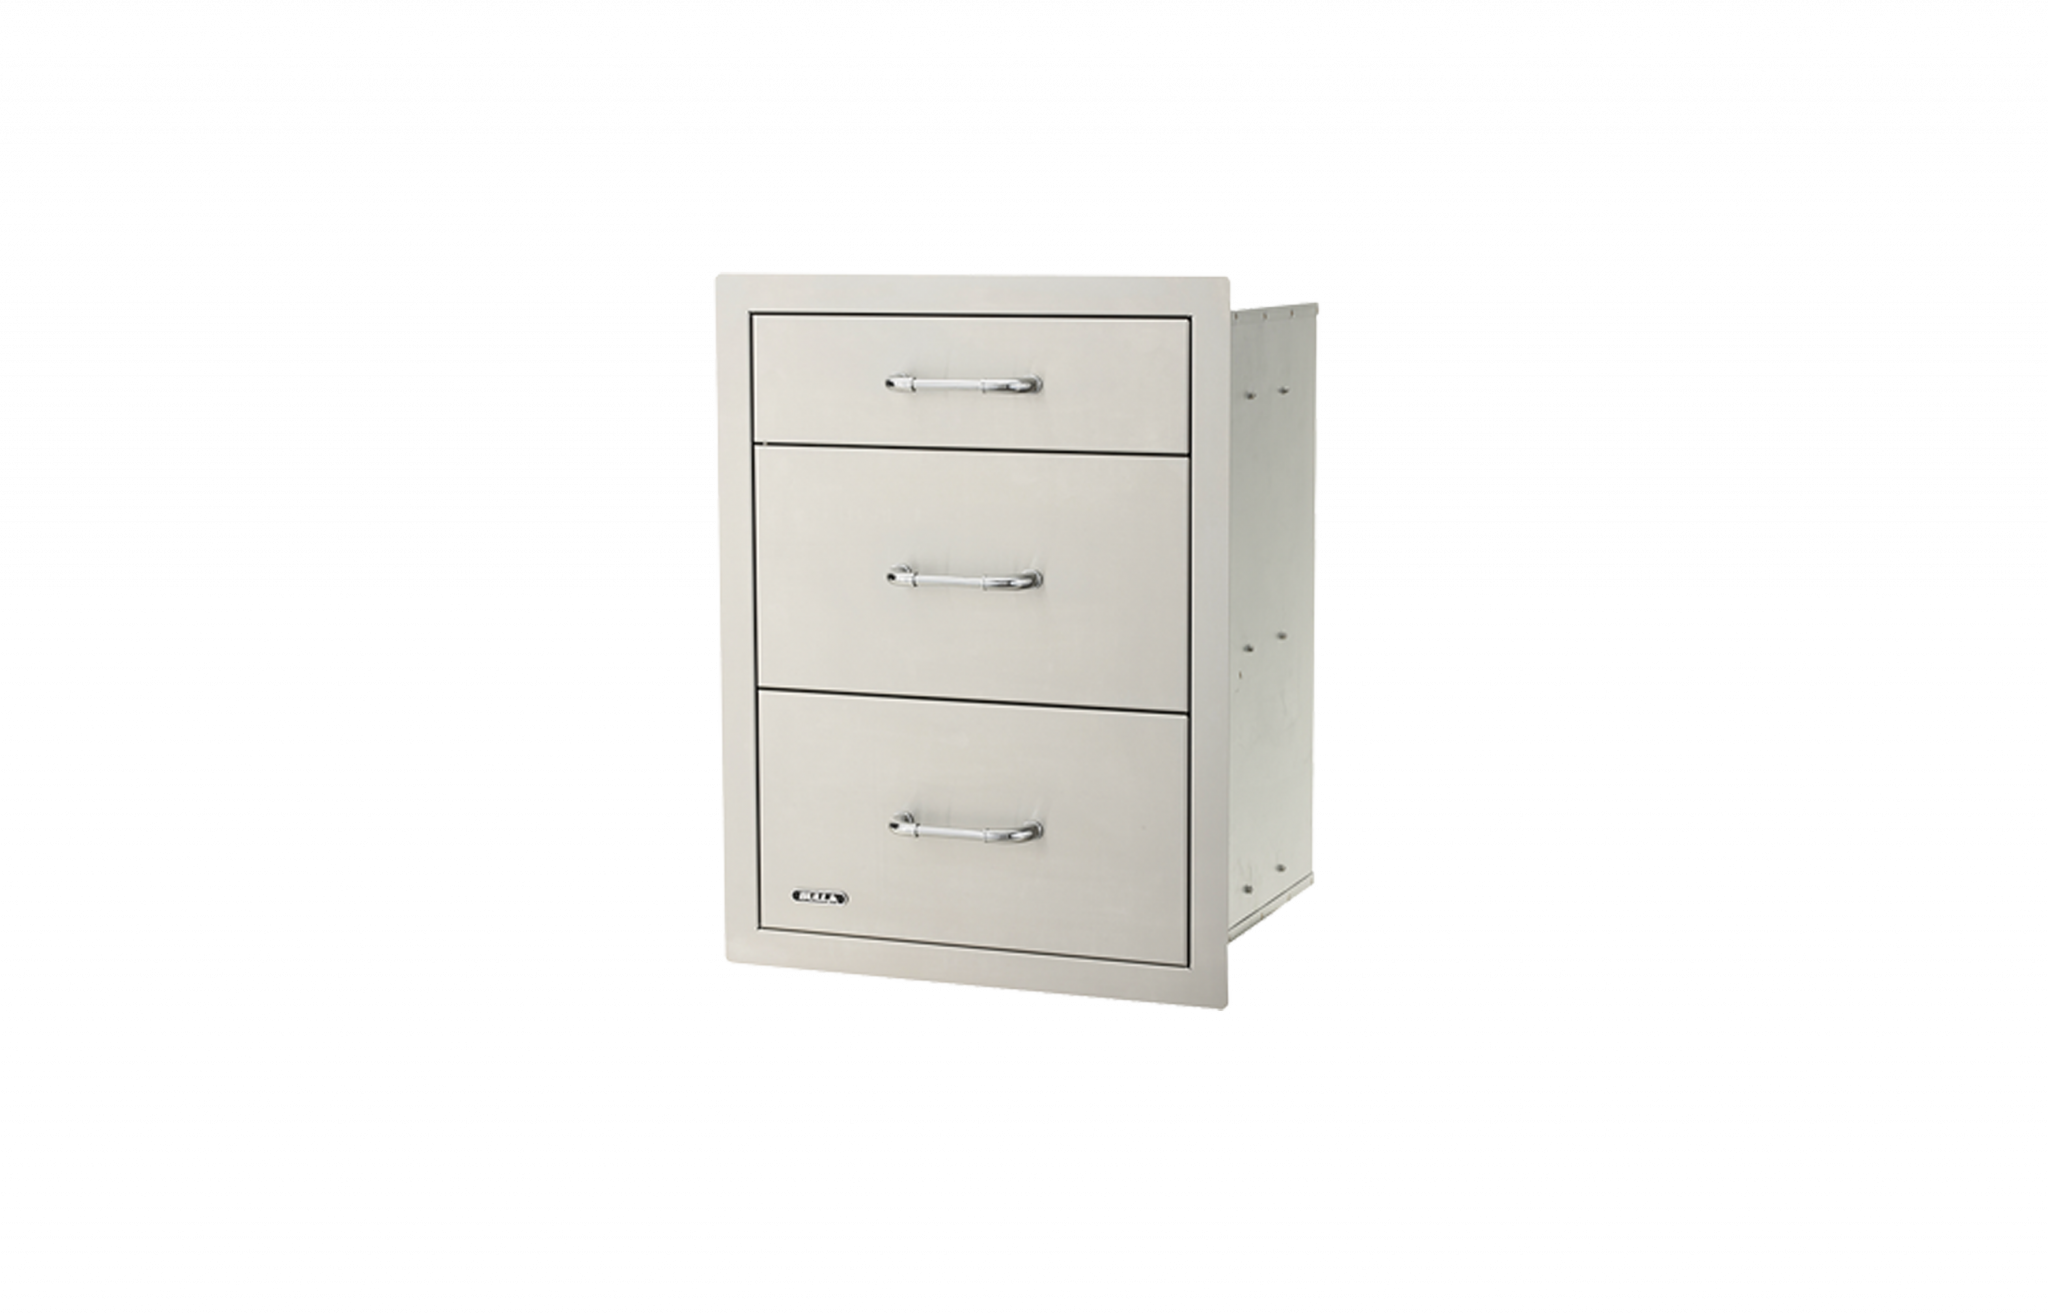 Stainless Steel Triple Drawer System